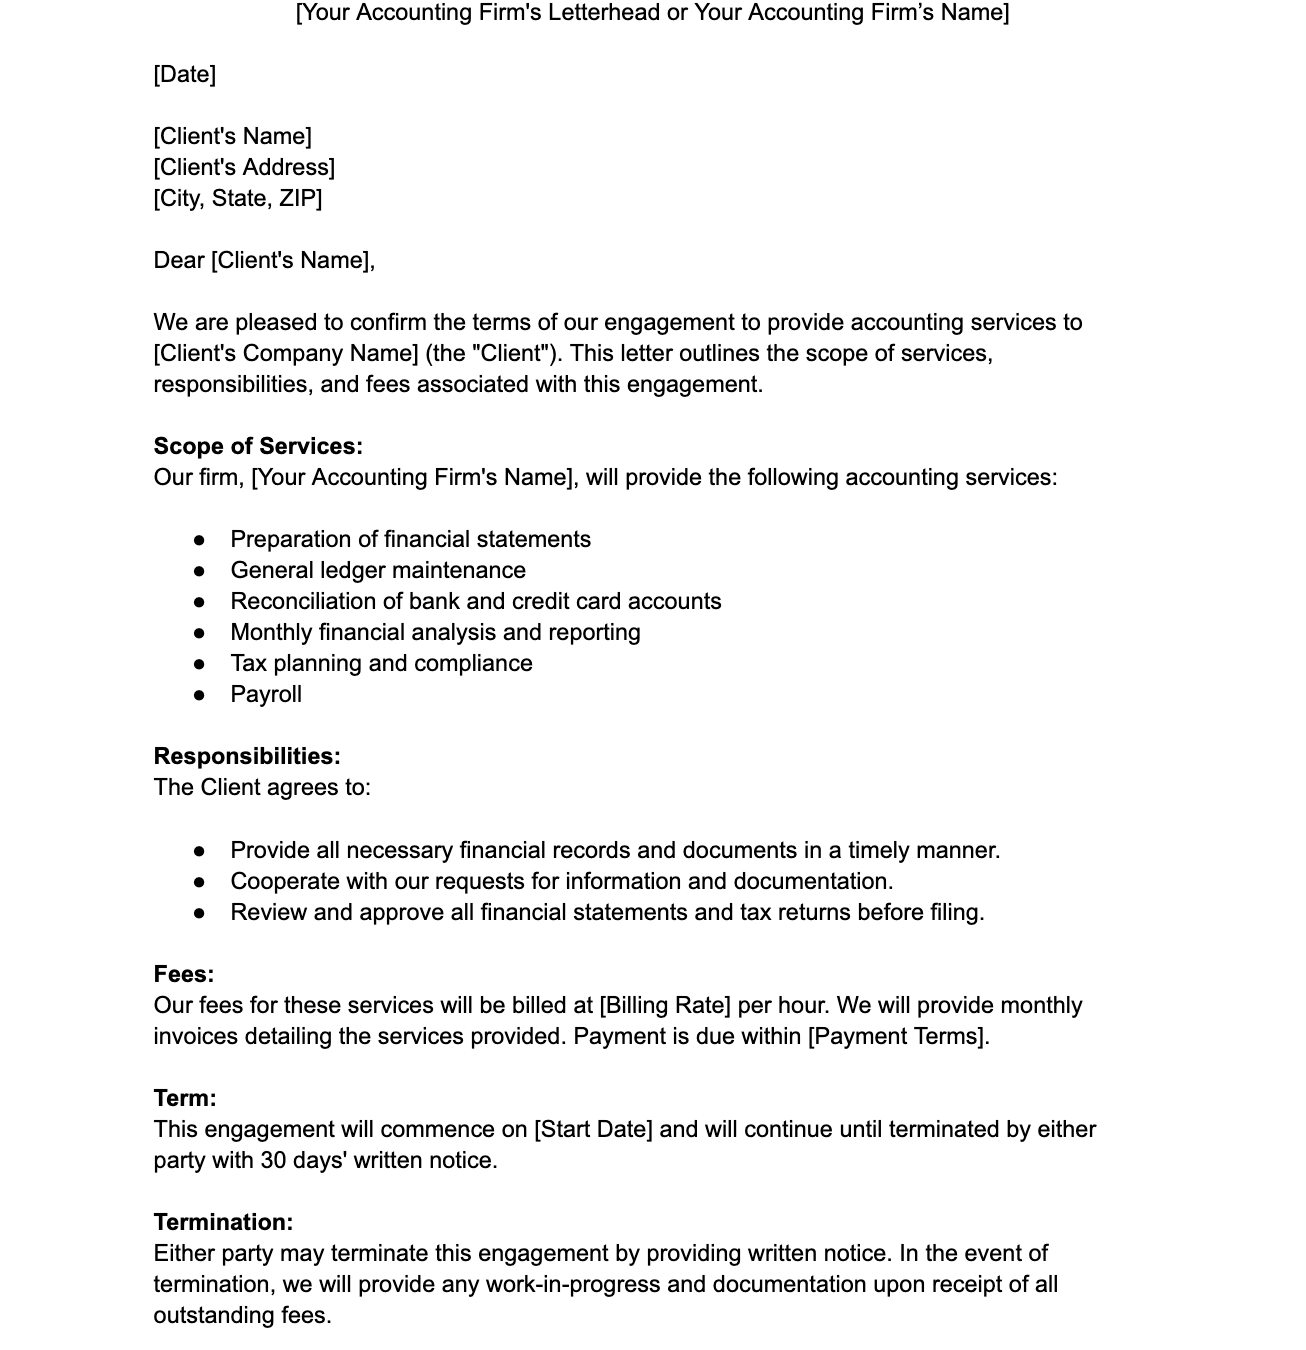 a sample of an accounting engagement letter